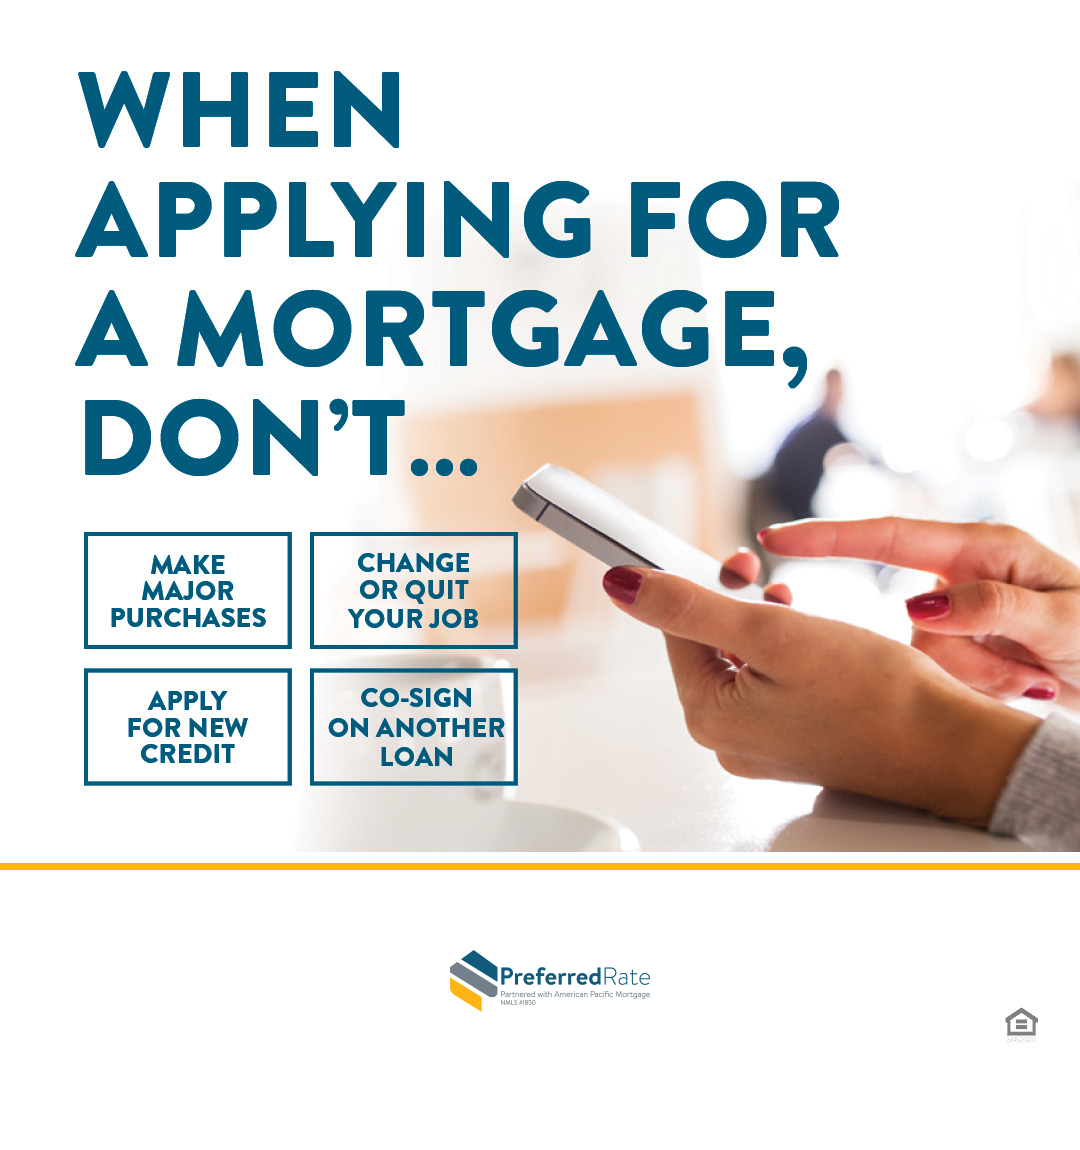 Don't be tempted - call me today with questions! Loan Officer - 216621 Oakbrook Terrace (630)673-6735